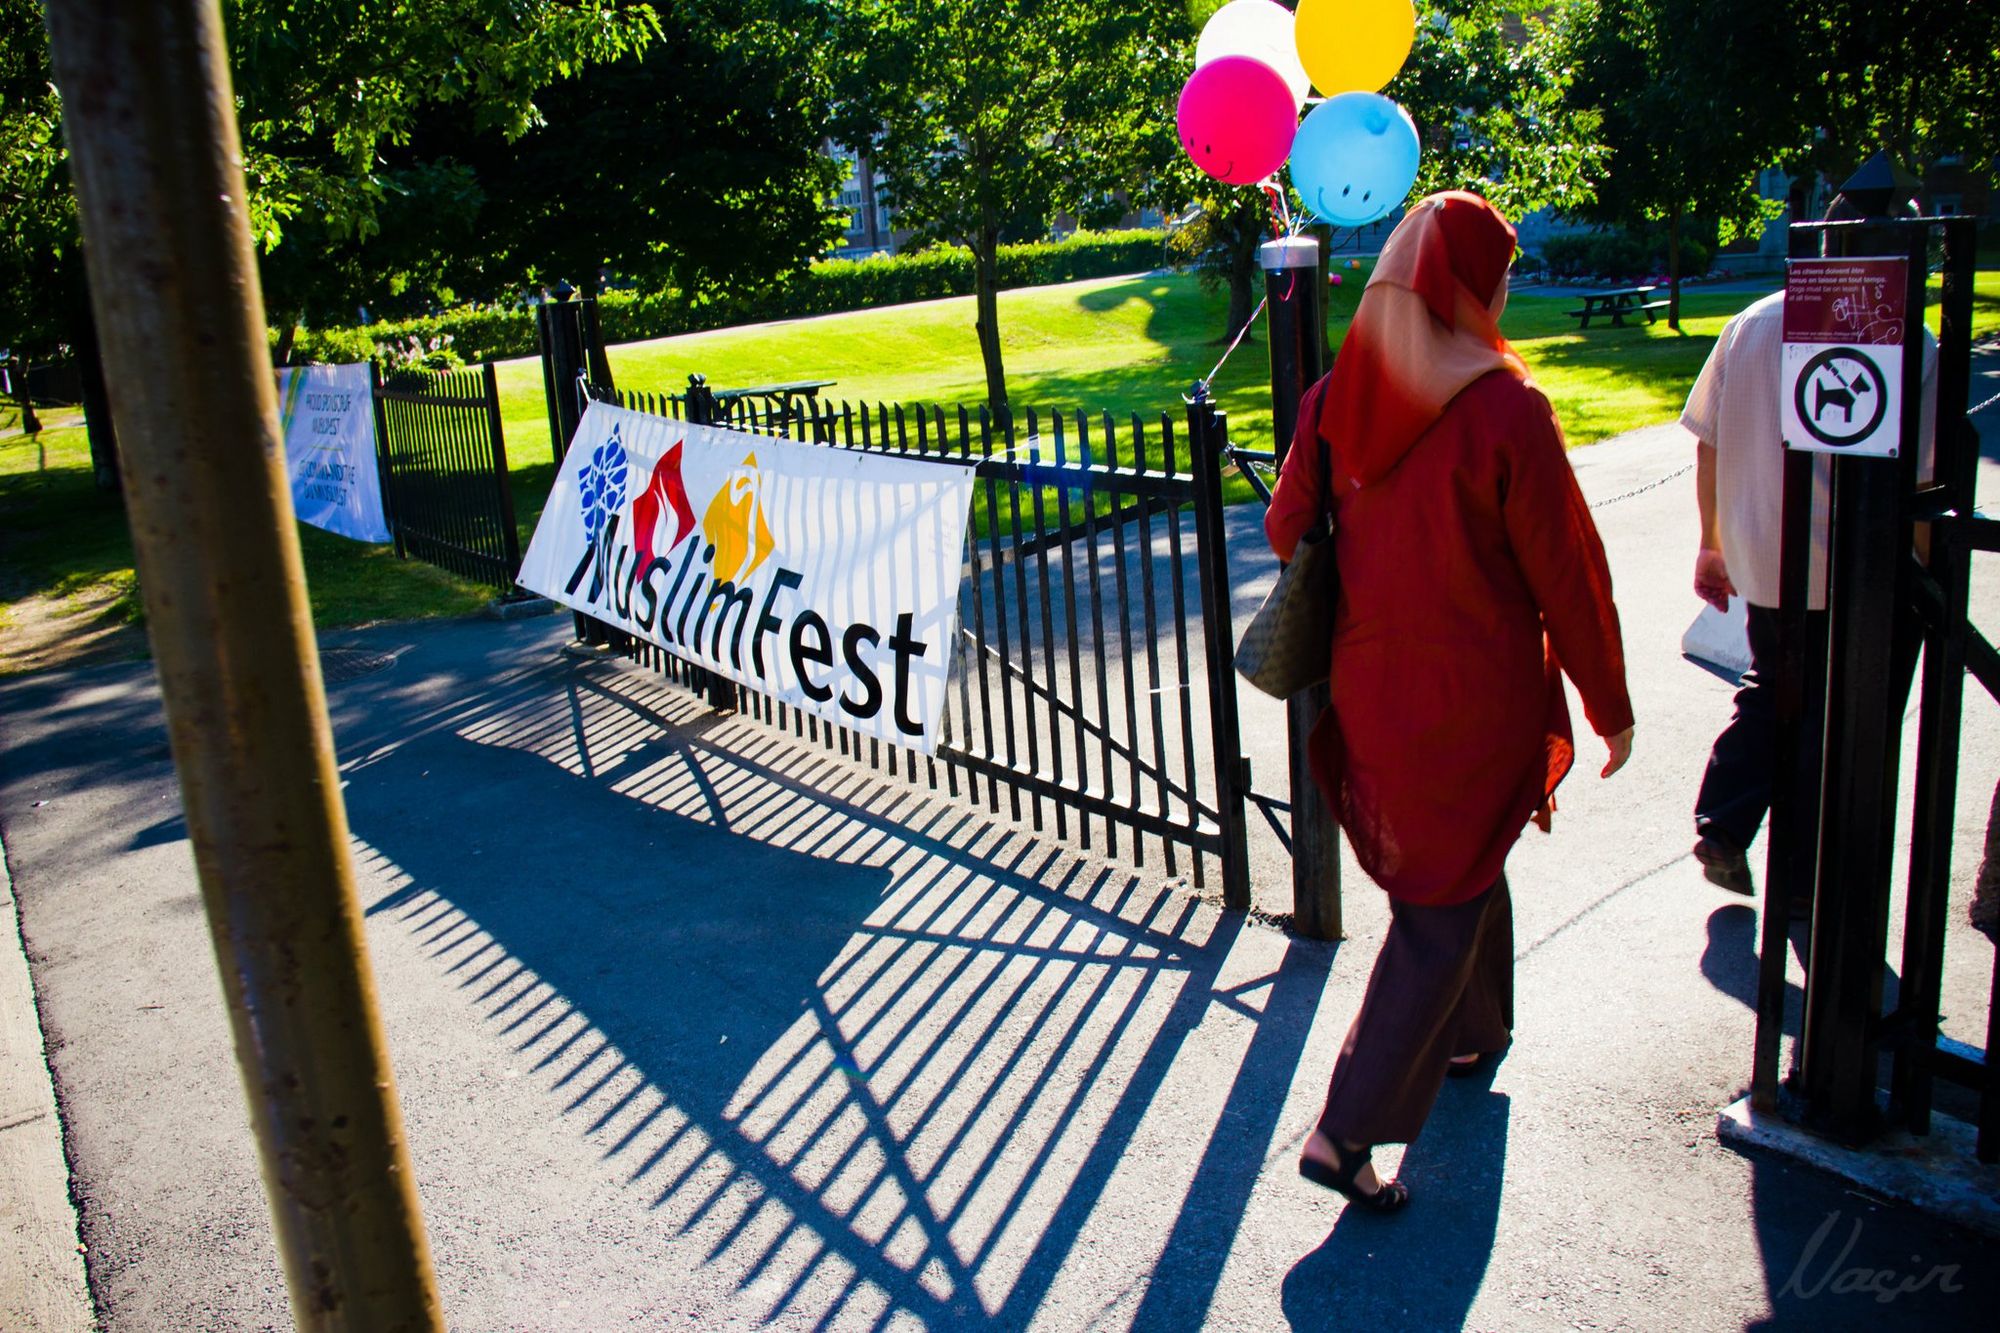 MuslimFest Montreal. July 16th, 2011